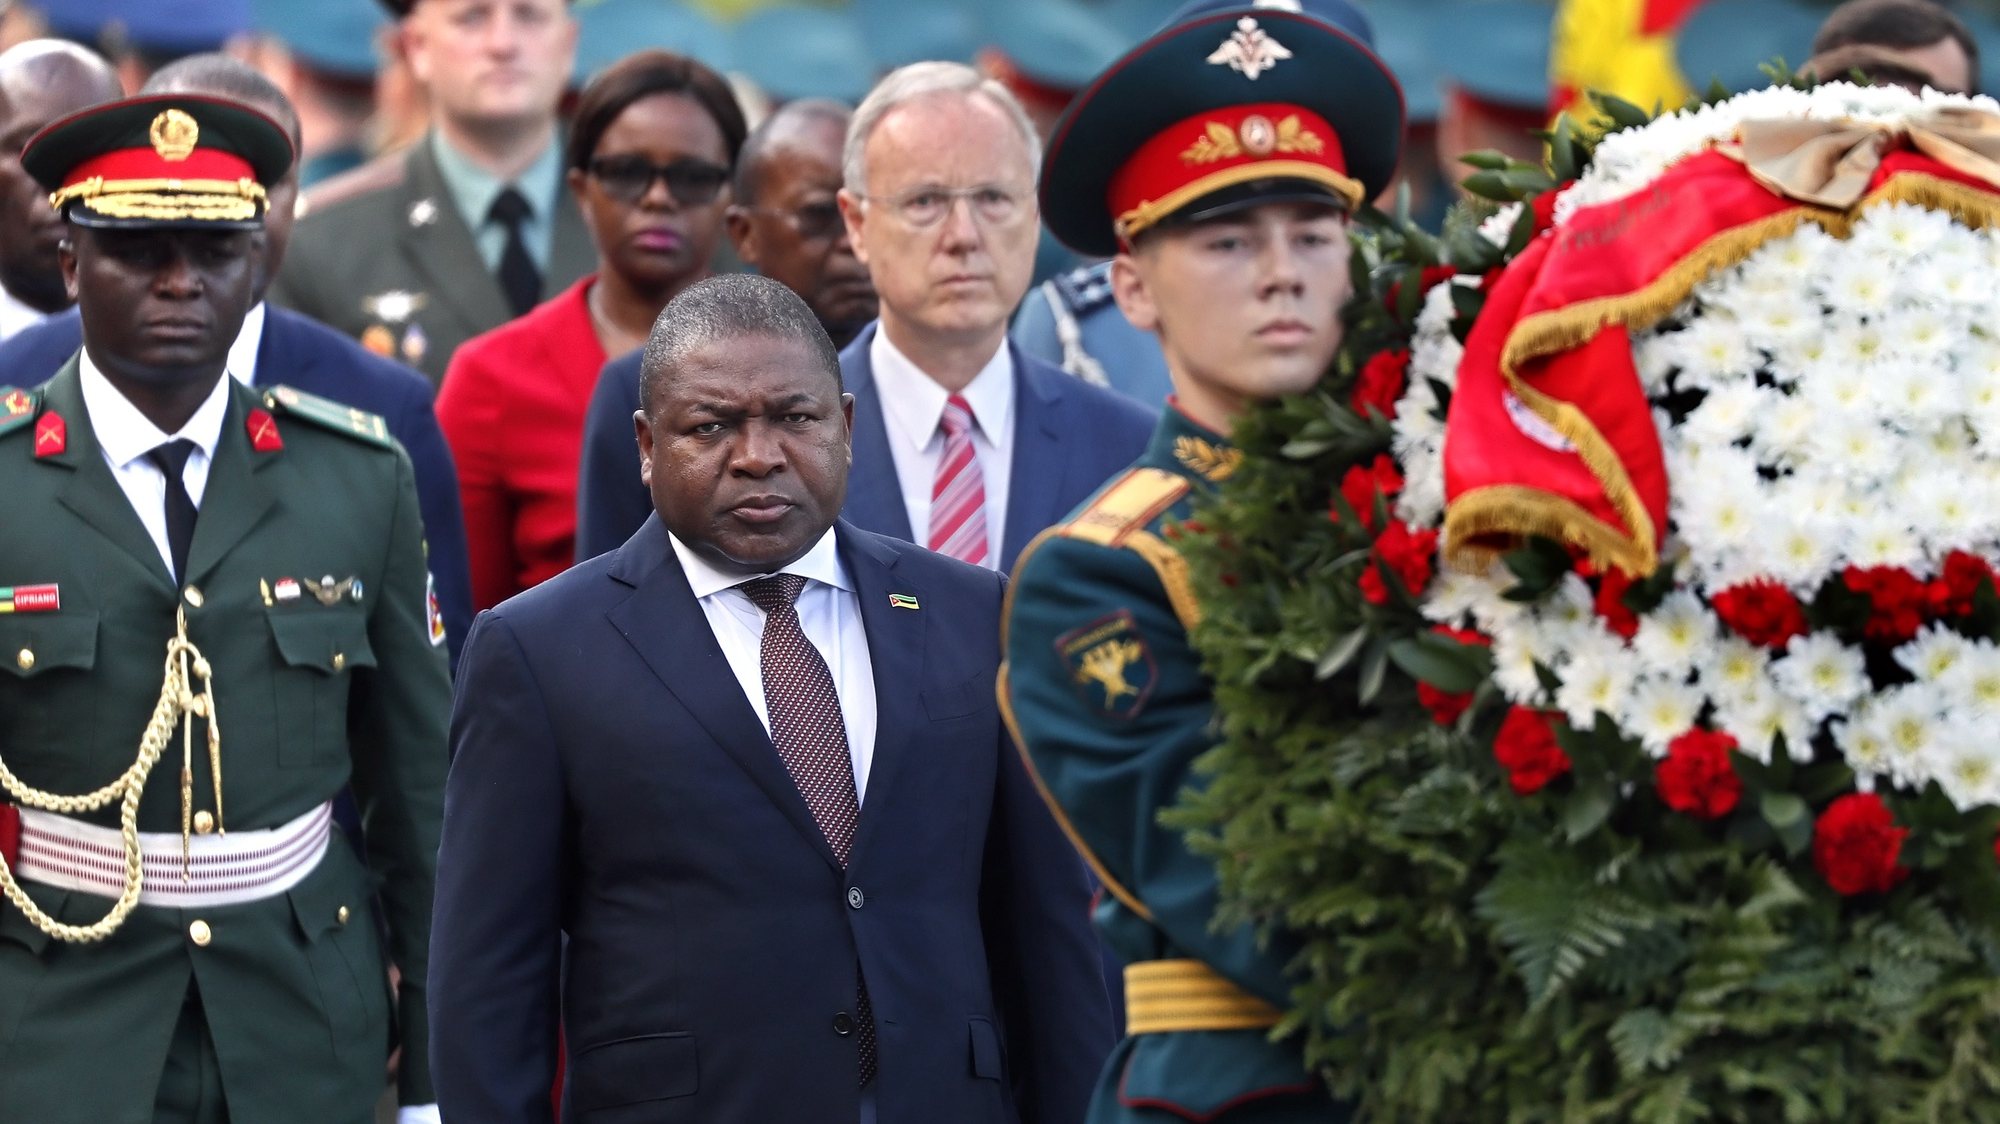 epa07783406 President of Mozambique Filipe Nyusi (C) attends a wreath laying ceremony at the Tomb of the Unknown Soldier in Moscow, Russia, 21 August 2019. Nyusi is on official visit to Russia.  EPA/YURI KOCHETKOV / POOL